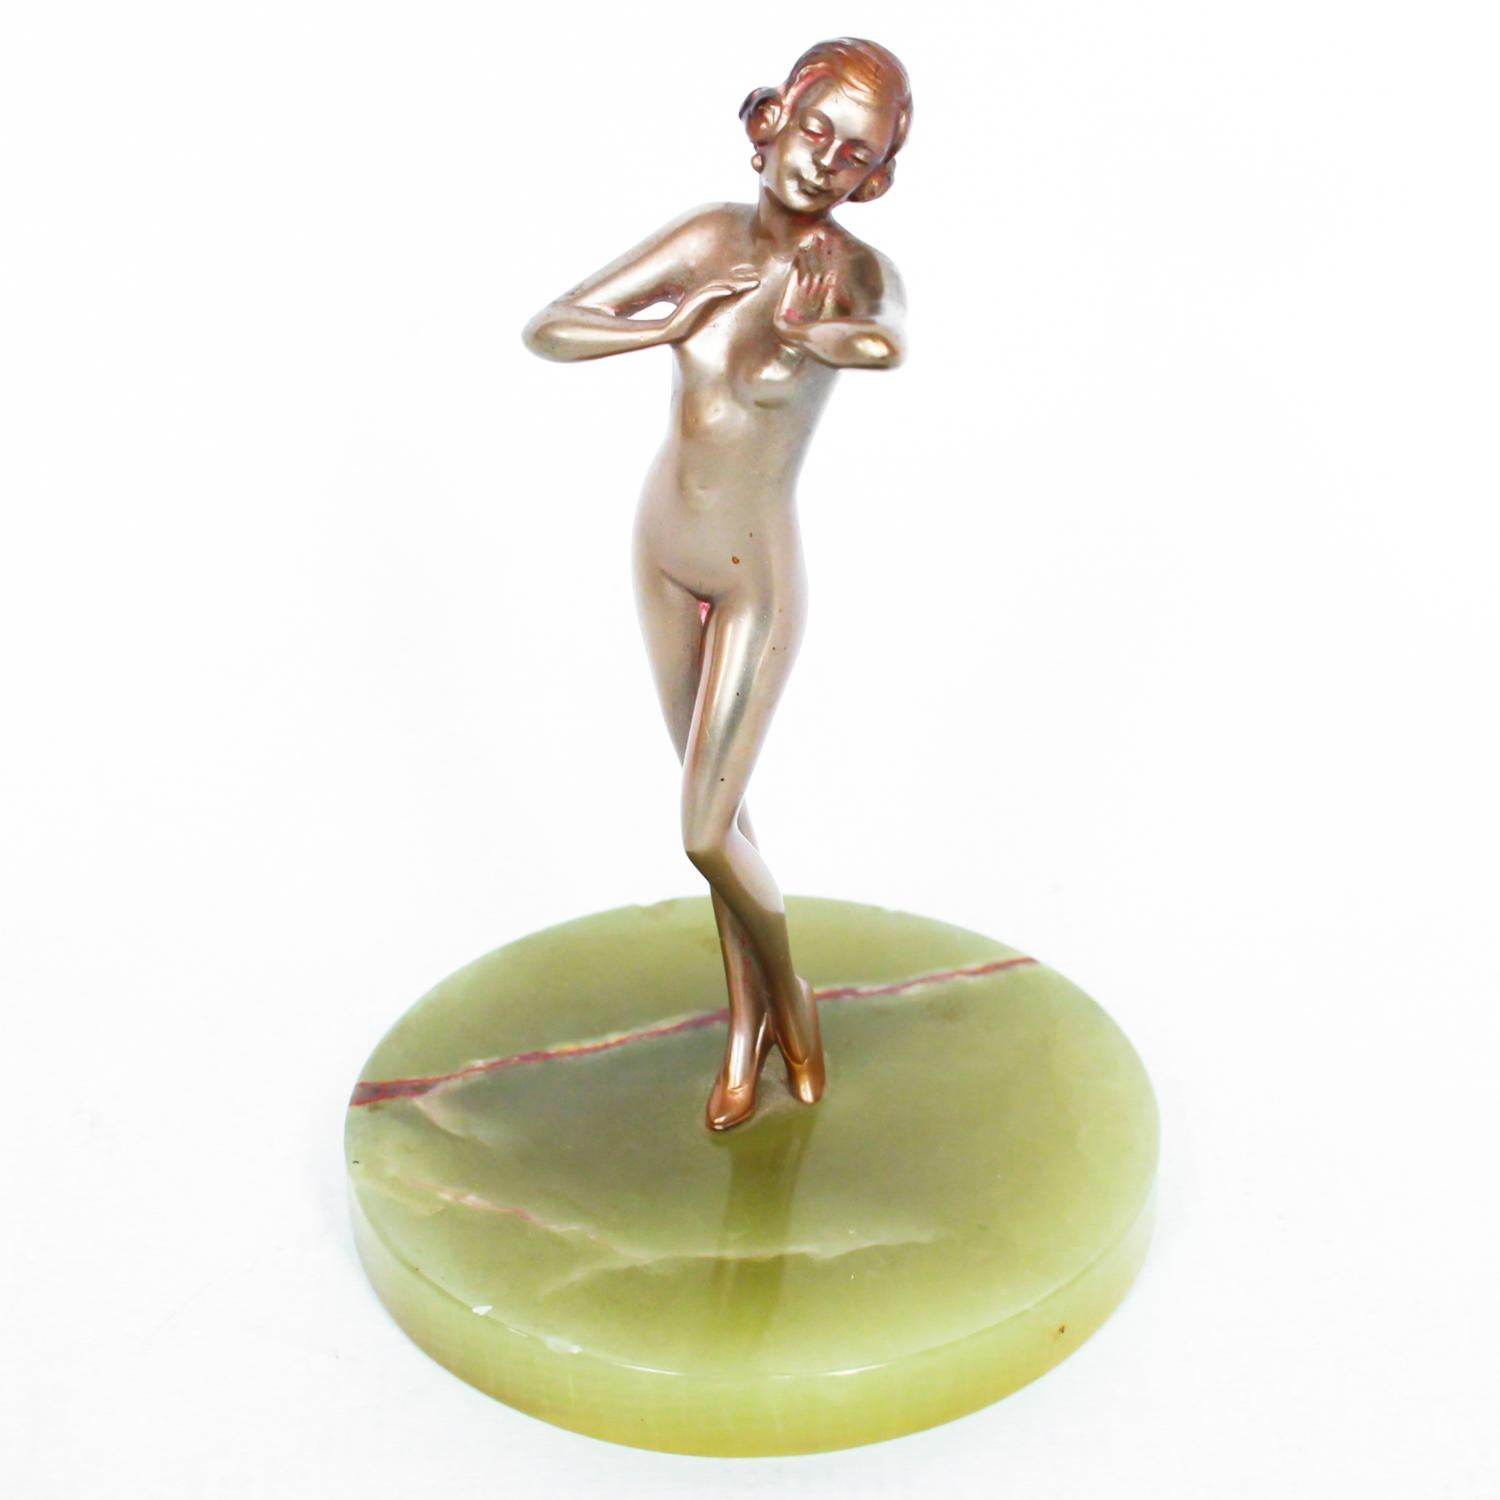 An Art Deco, cold painted bronze figure of an elegant dancer in a striking pose, raised on a green onyx base.

Attributed to Lorenzl.

Dimensions: H 12 cm, W 8 cm, D 8 cm

Origin: Austrian

Date: circa 1930

Item No: 0710191.

  